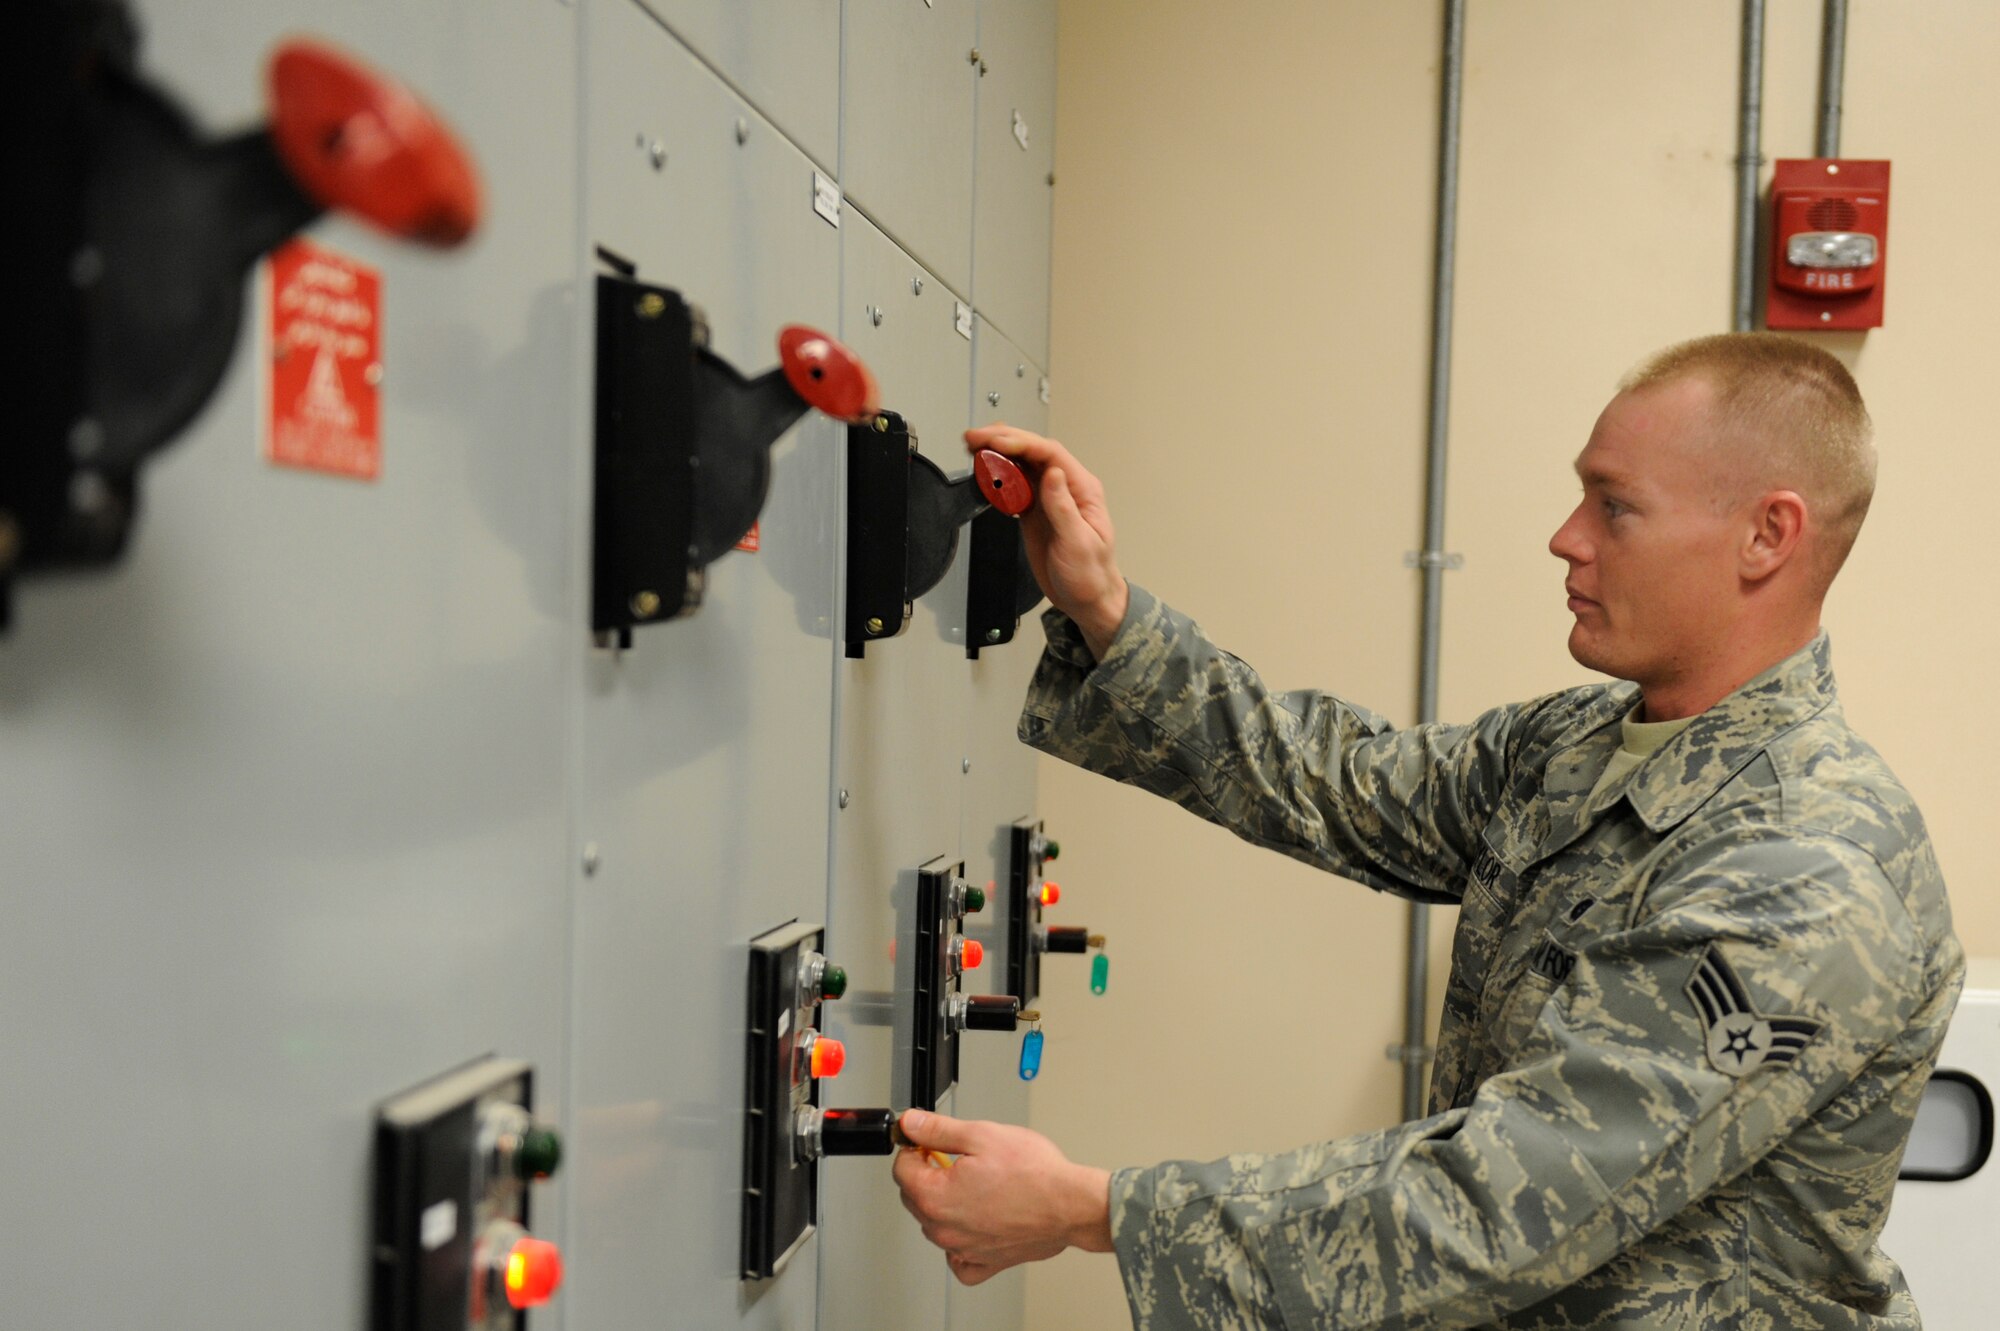 Senior Airman. Isaac Taylor, 380th Expeditionary Logistics Readiness Squadron, fuels flight, sets the control panel of "Bubba," a type three hydrant system, for distribution of fuel to the flightline, April 4 at an undisclosed location in Southwest Asia. Once the pumps are energized, "Bubba" pushes an average of 520,000 gallons of fuel daily. Airman Taylor is deployed from Little Rock AFB, Ark. and hails from Searcy, Ark. (U.S. Air Force photo by Senior Airman Brian J. Ellis) (Released)